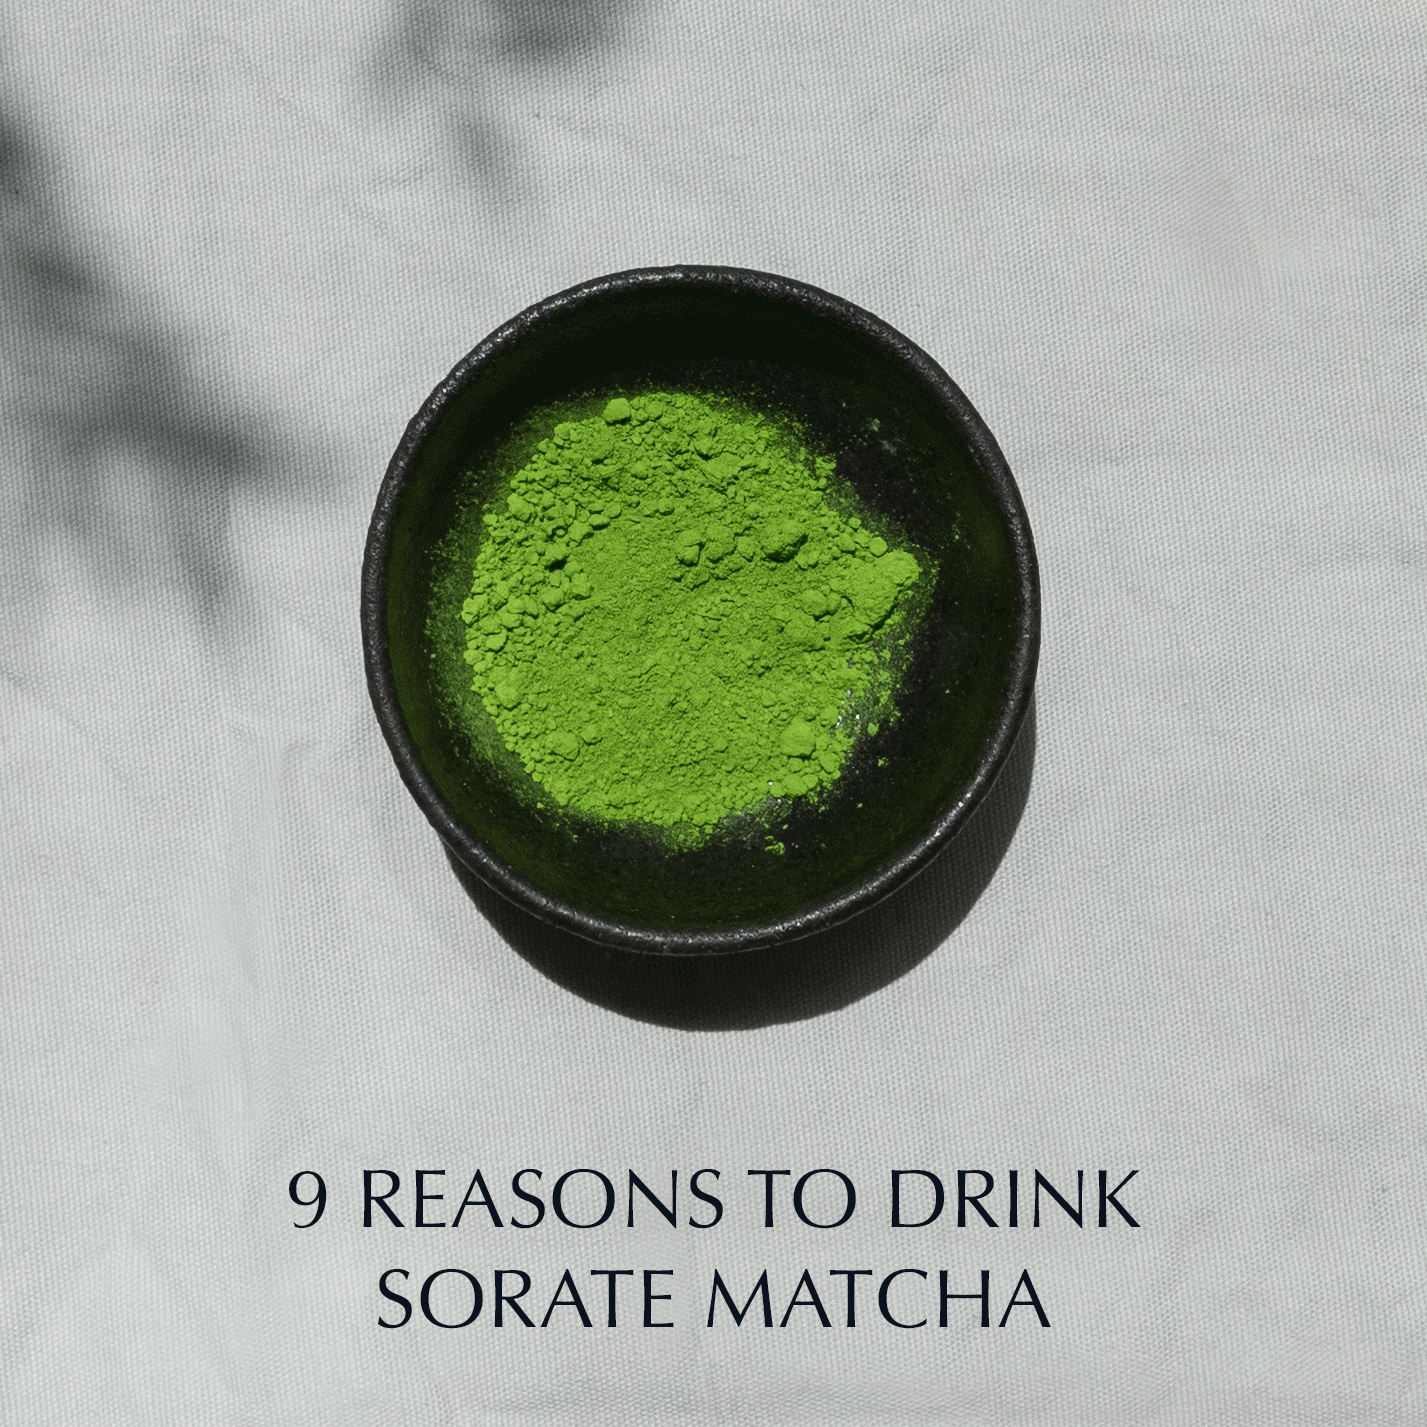 9 Reasons to make Matcha Part of your Life - sorate